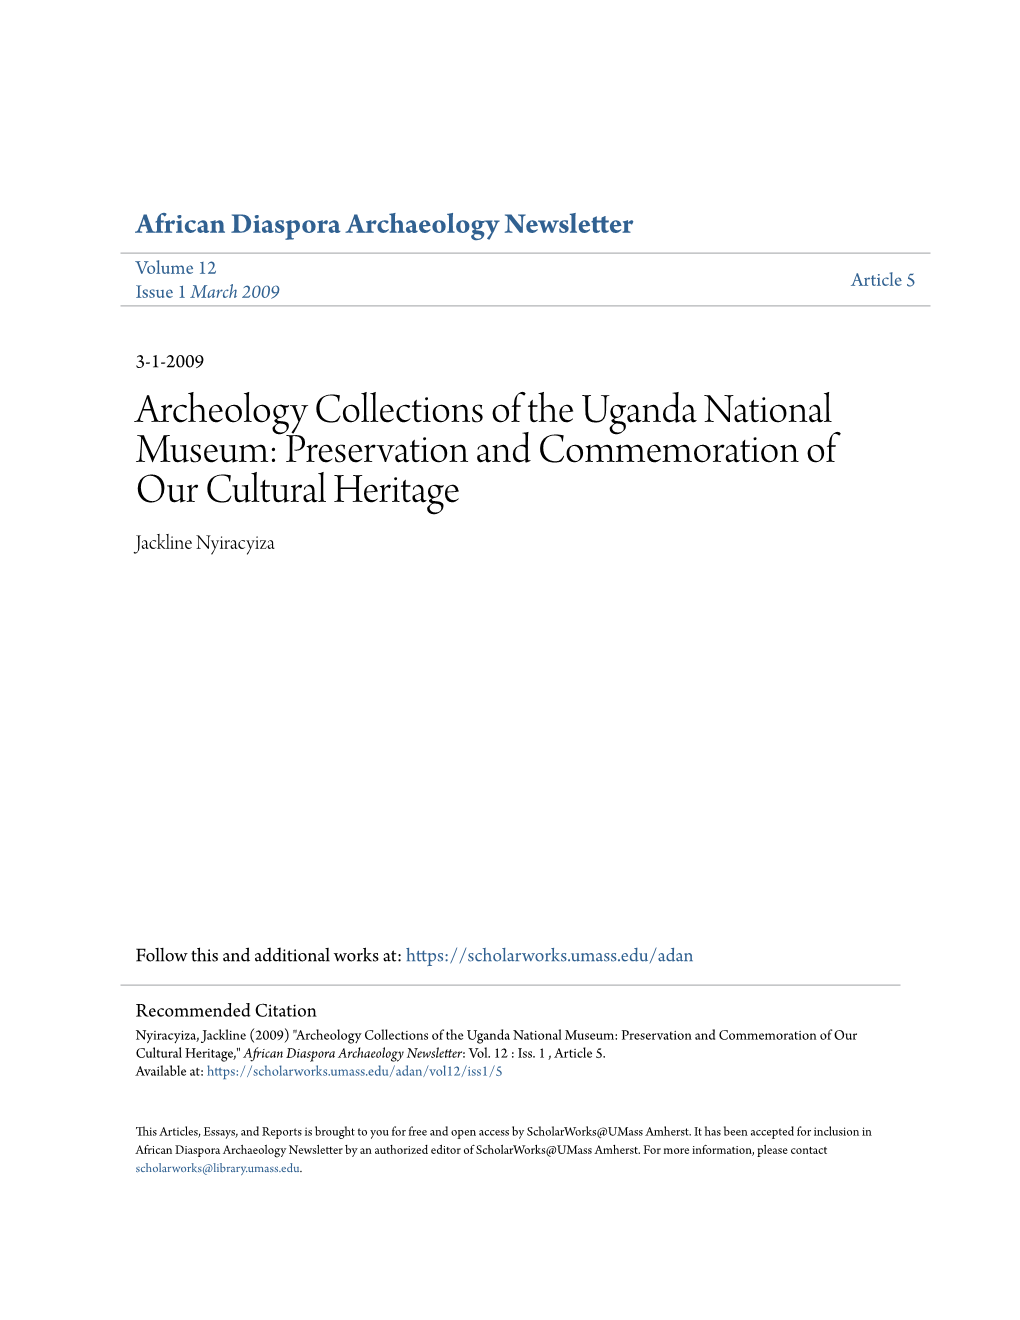 Archeology Collections of the Uganda National Museum: Preservation and Commemoration of Our Cultural Heritage Jackline Nyiracyiza